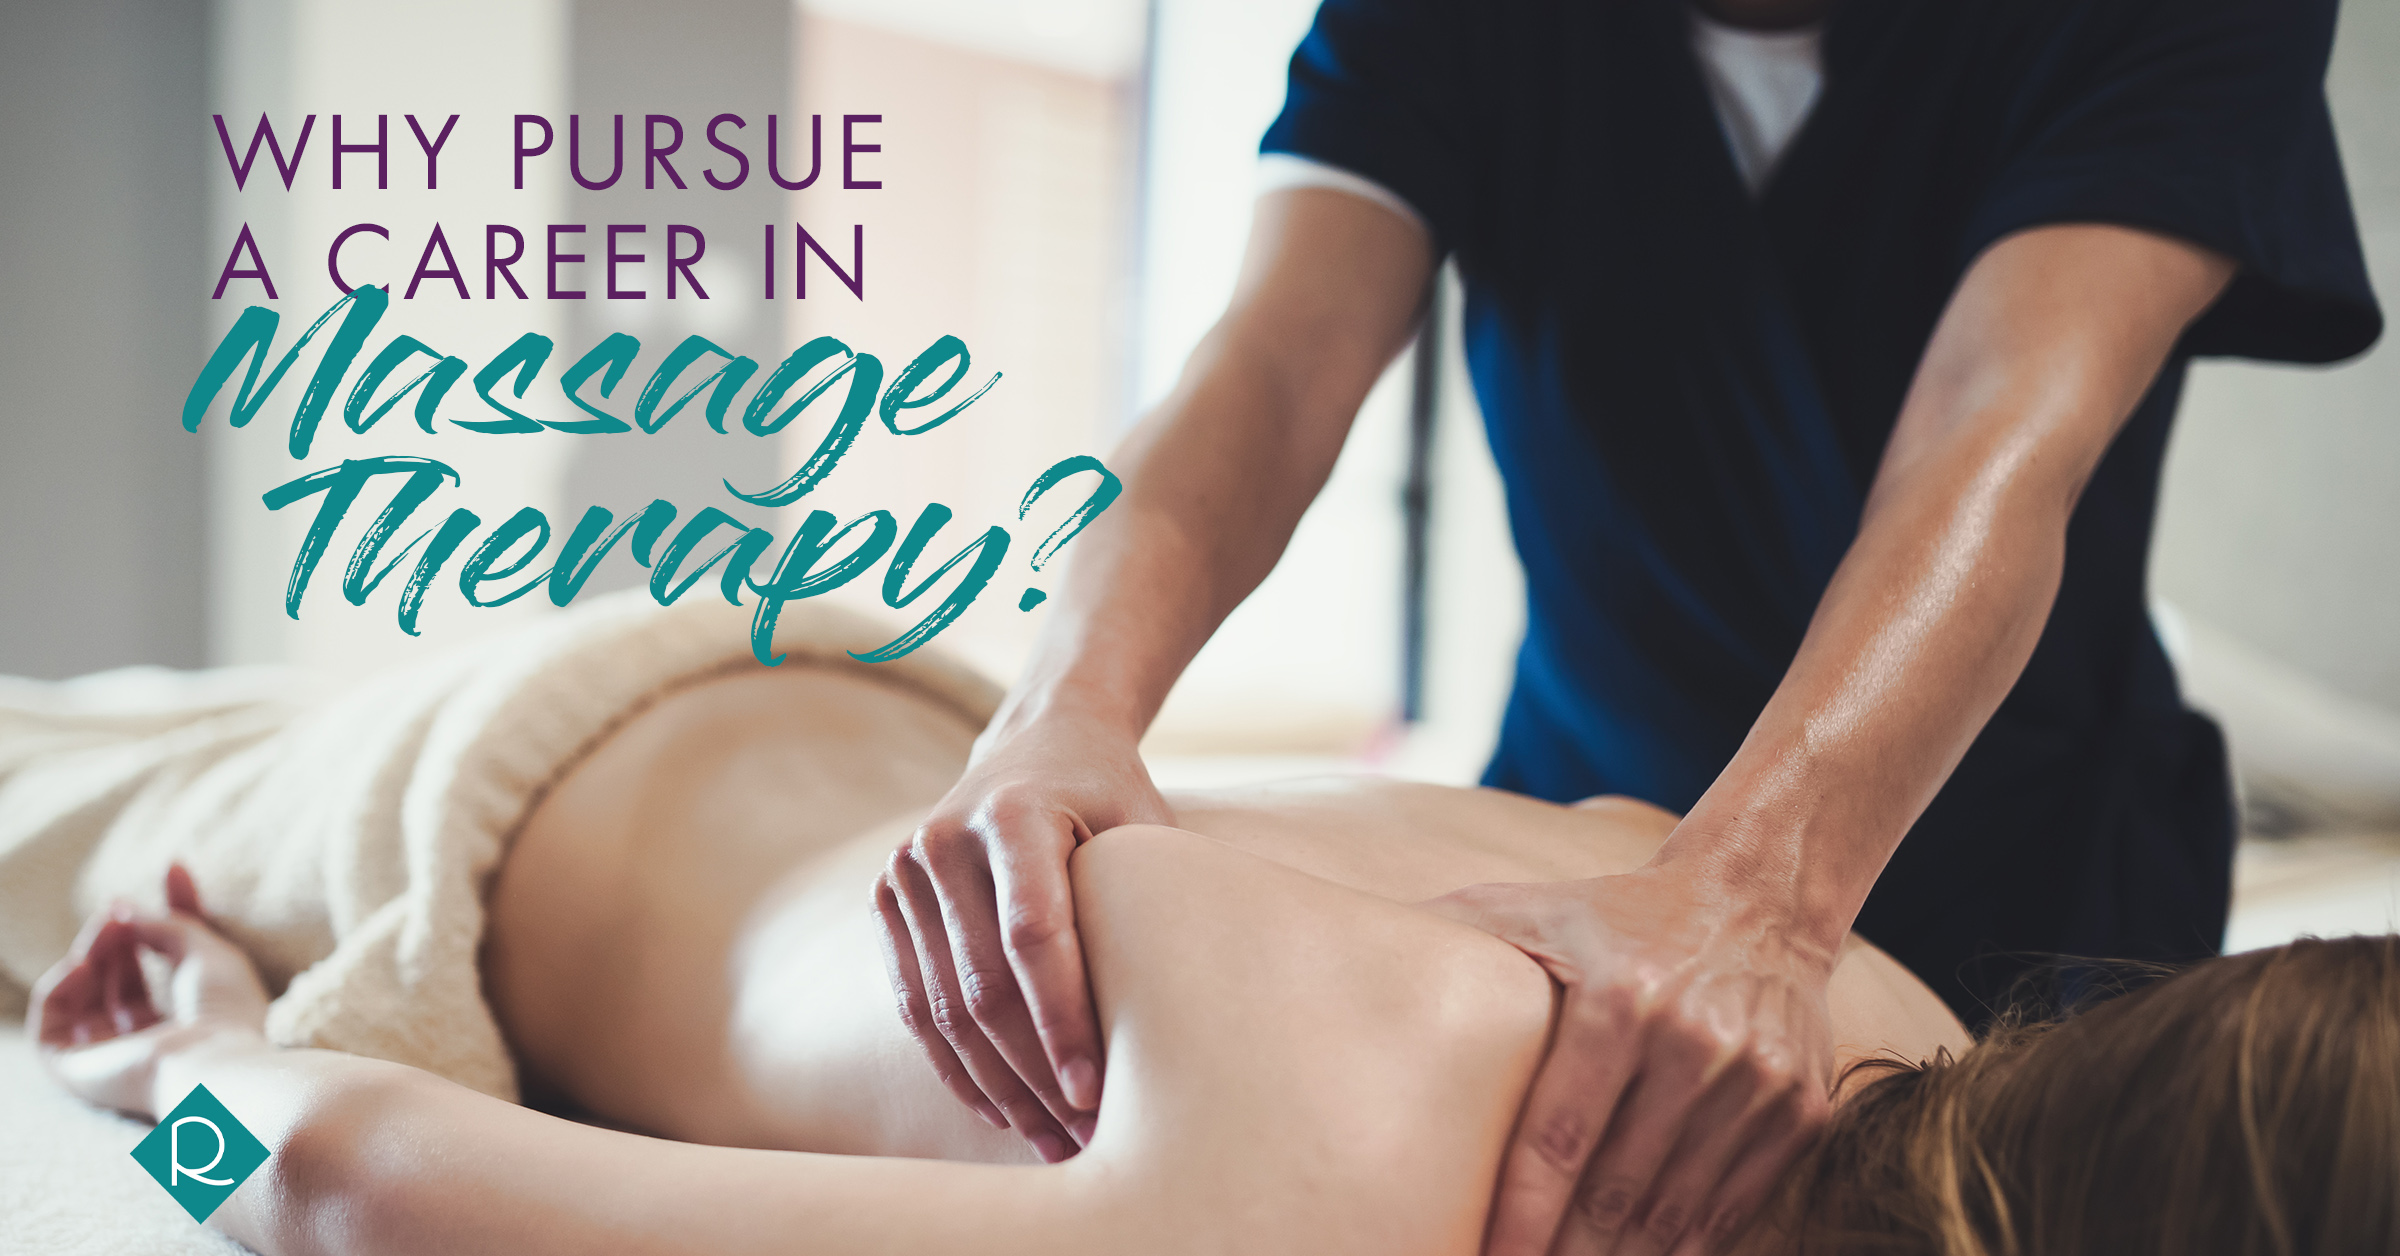 Why Pursue a Career in Massage Therapy?